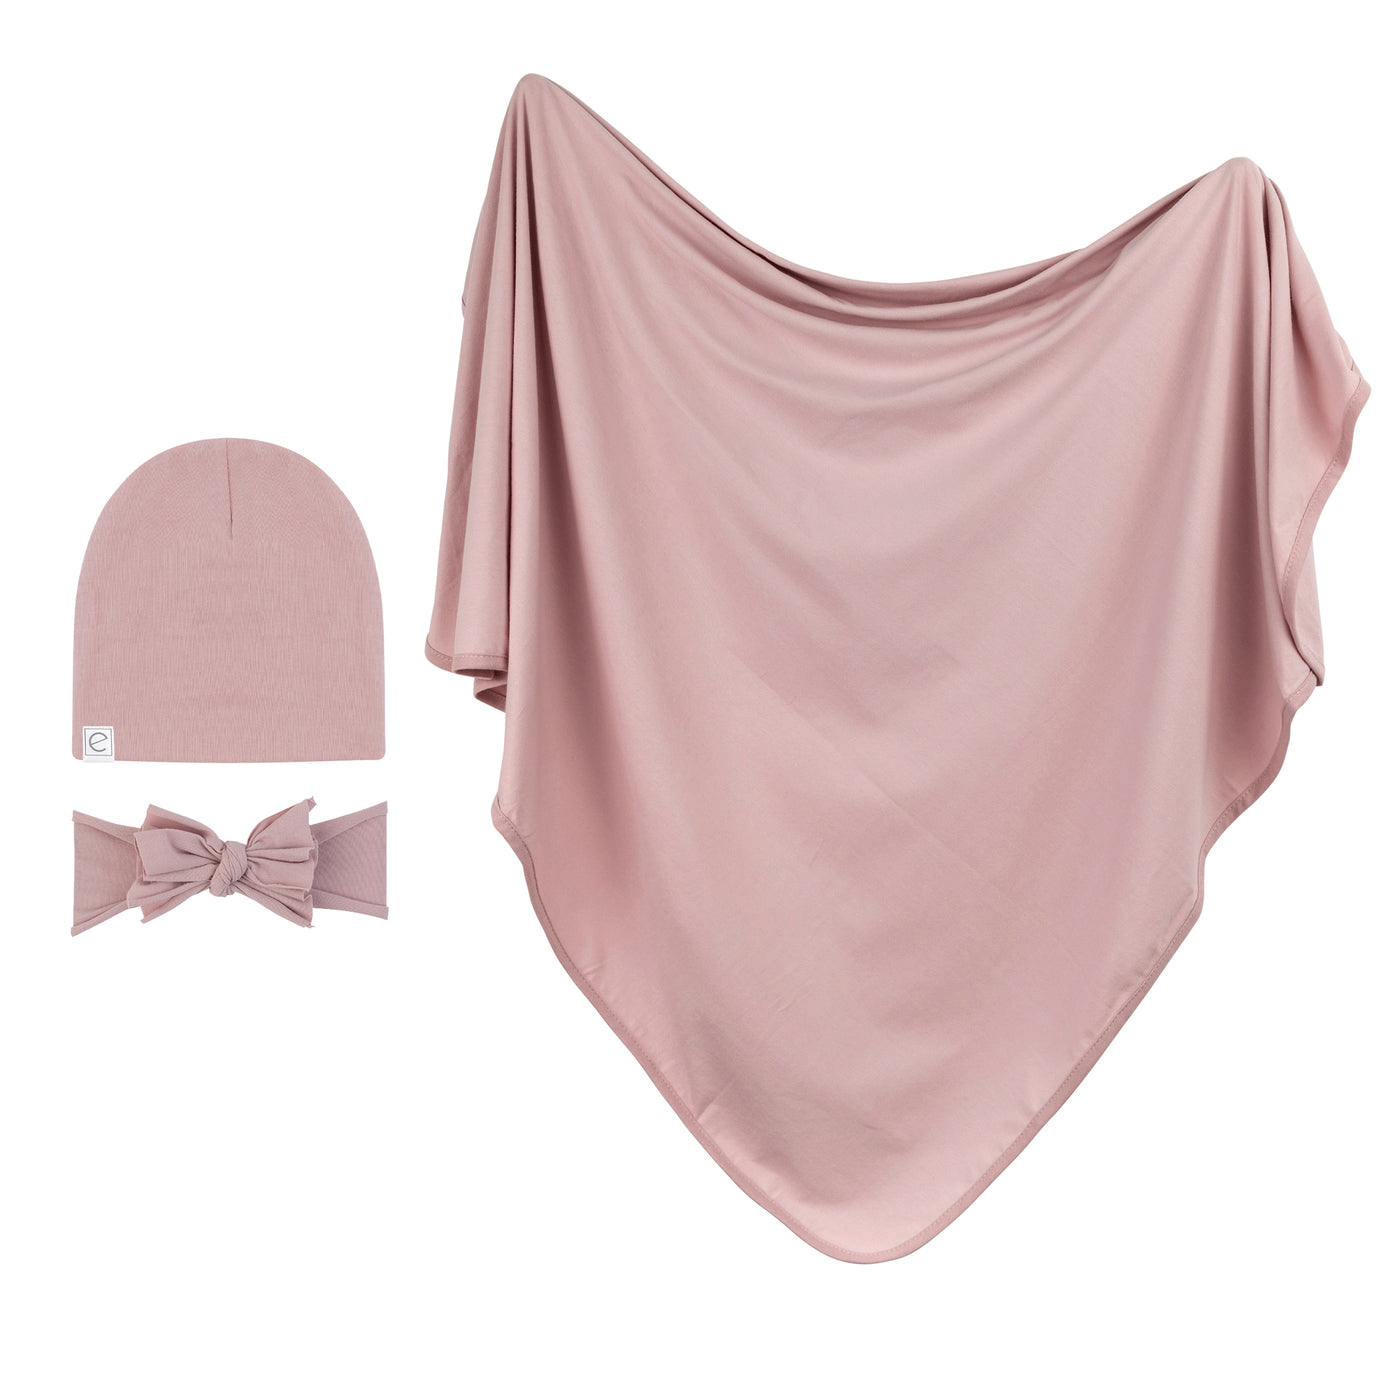 Ely's & Co. Receiving Blanket with Beanie and Headband - Dusty Rose